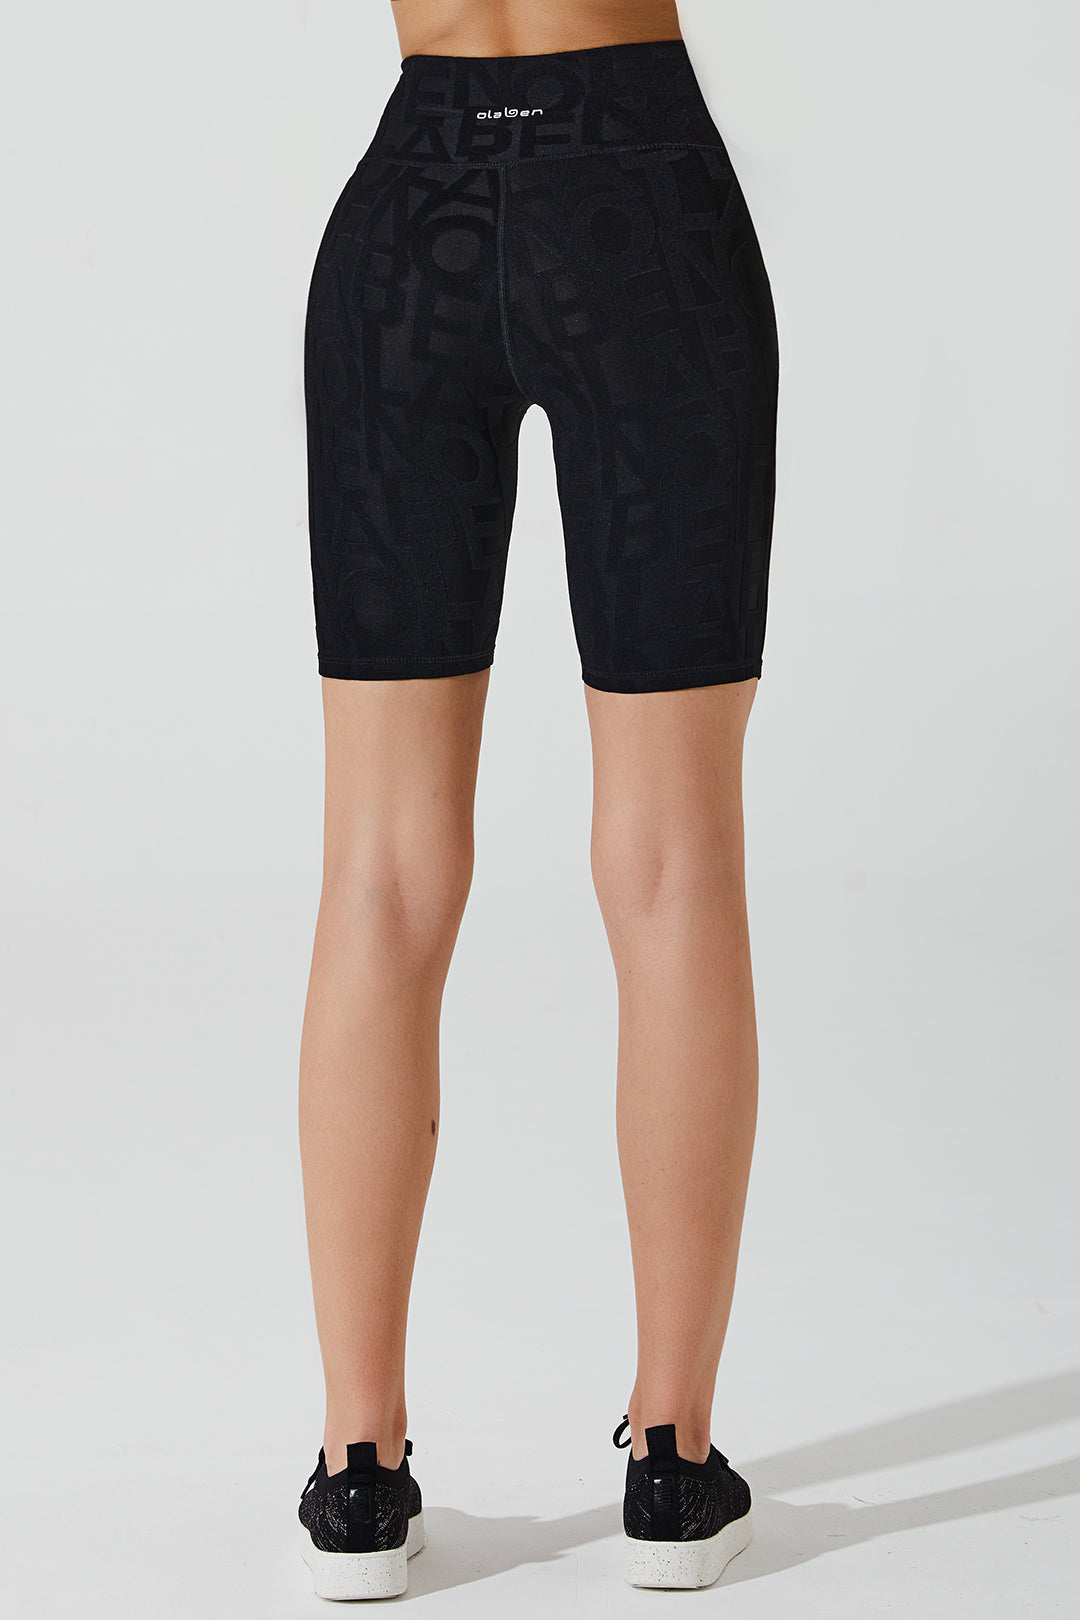 Stylish carbon black women's shorts with 3D design - perfect for biking adventures.